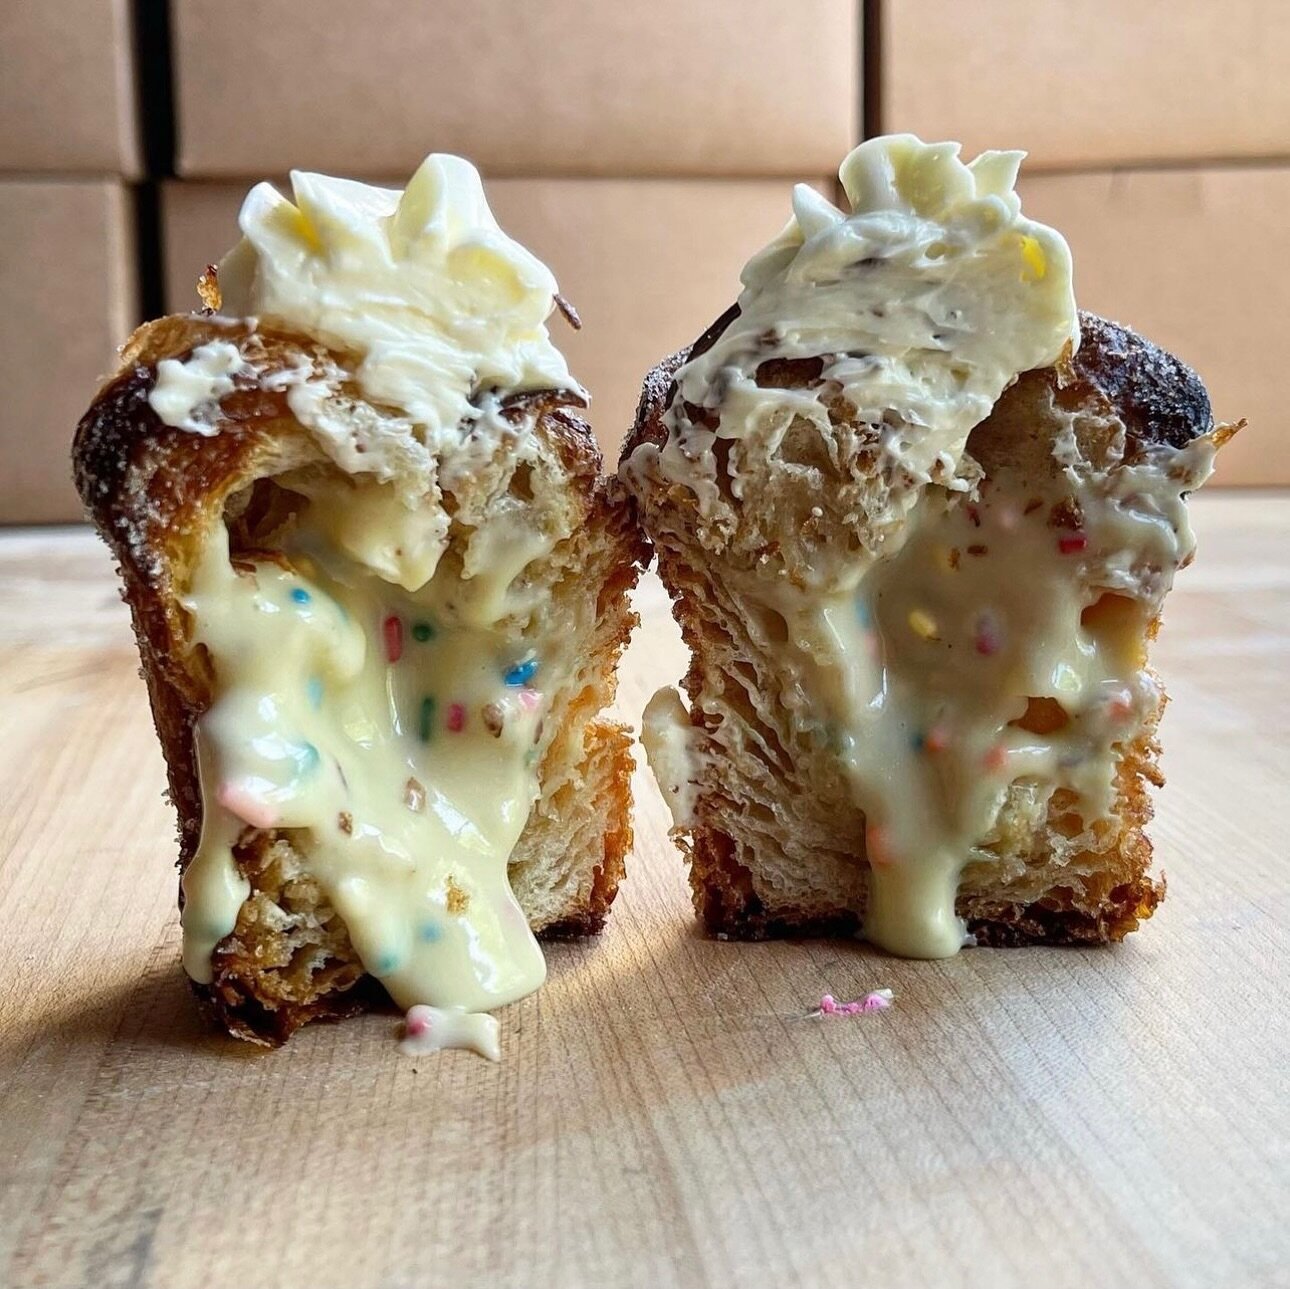 Happy second birthday to us! Today is the 2 year anniversary of our opening on Tennyson (crazy I know). We&rsquo;re bringing back some of your favorite birthday cake flavored treats like our birthday cake cruffin and funfetti sugar cookies. So many o